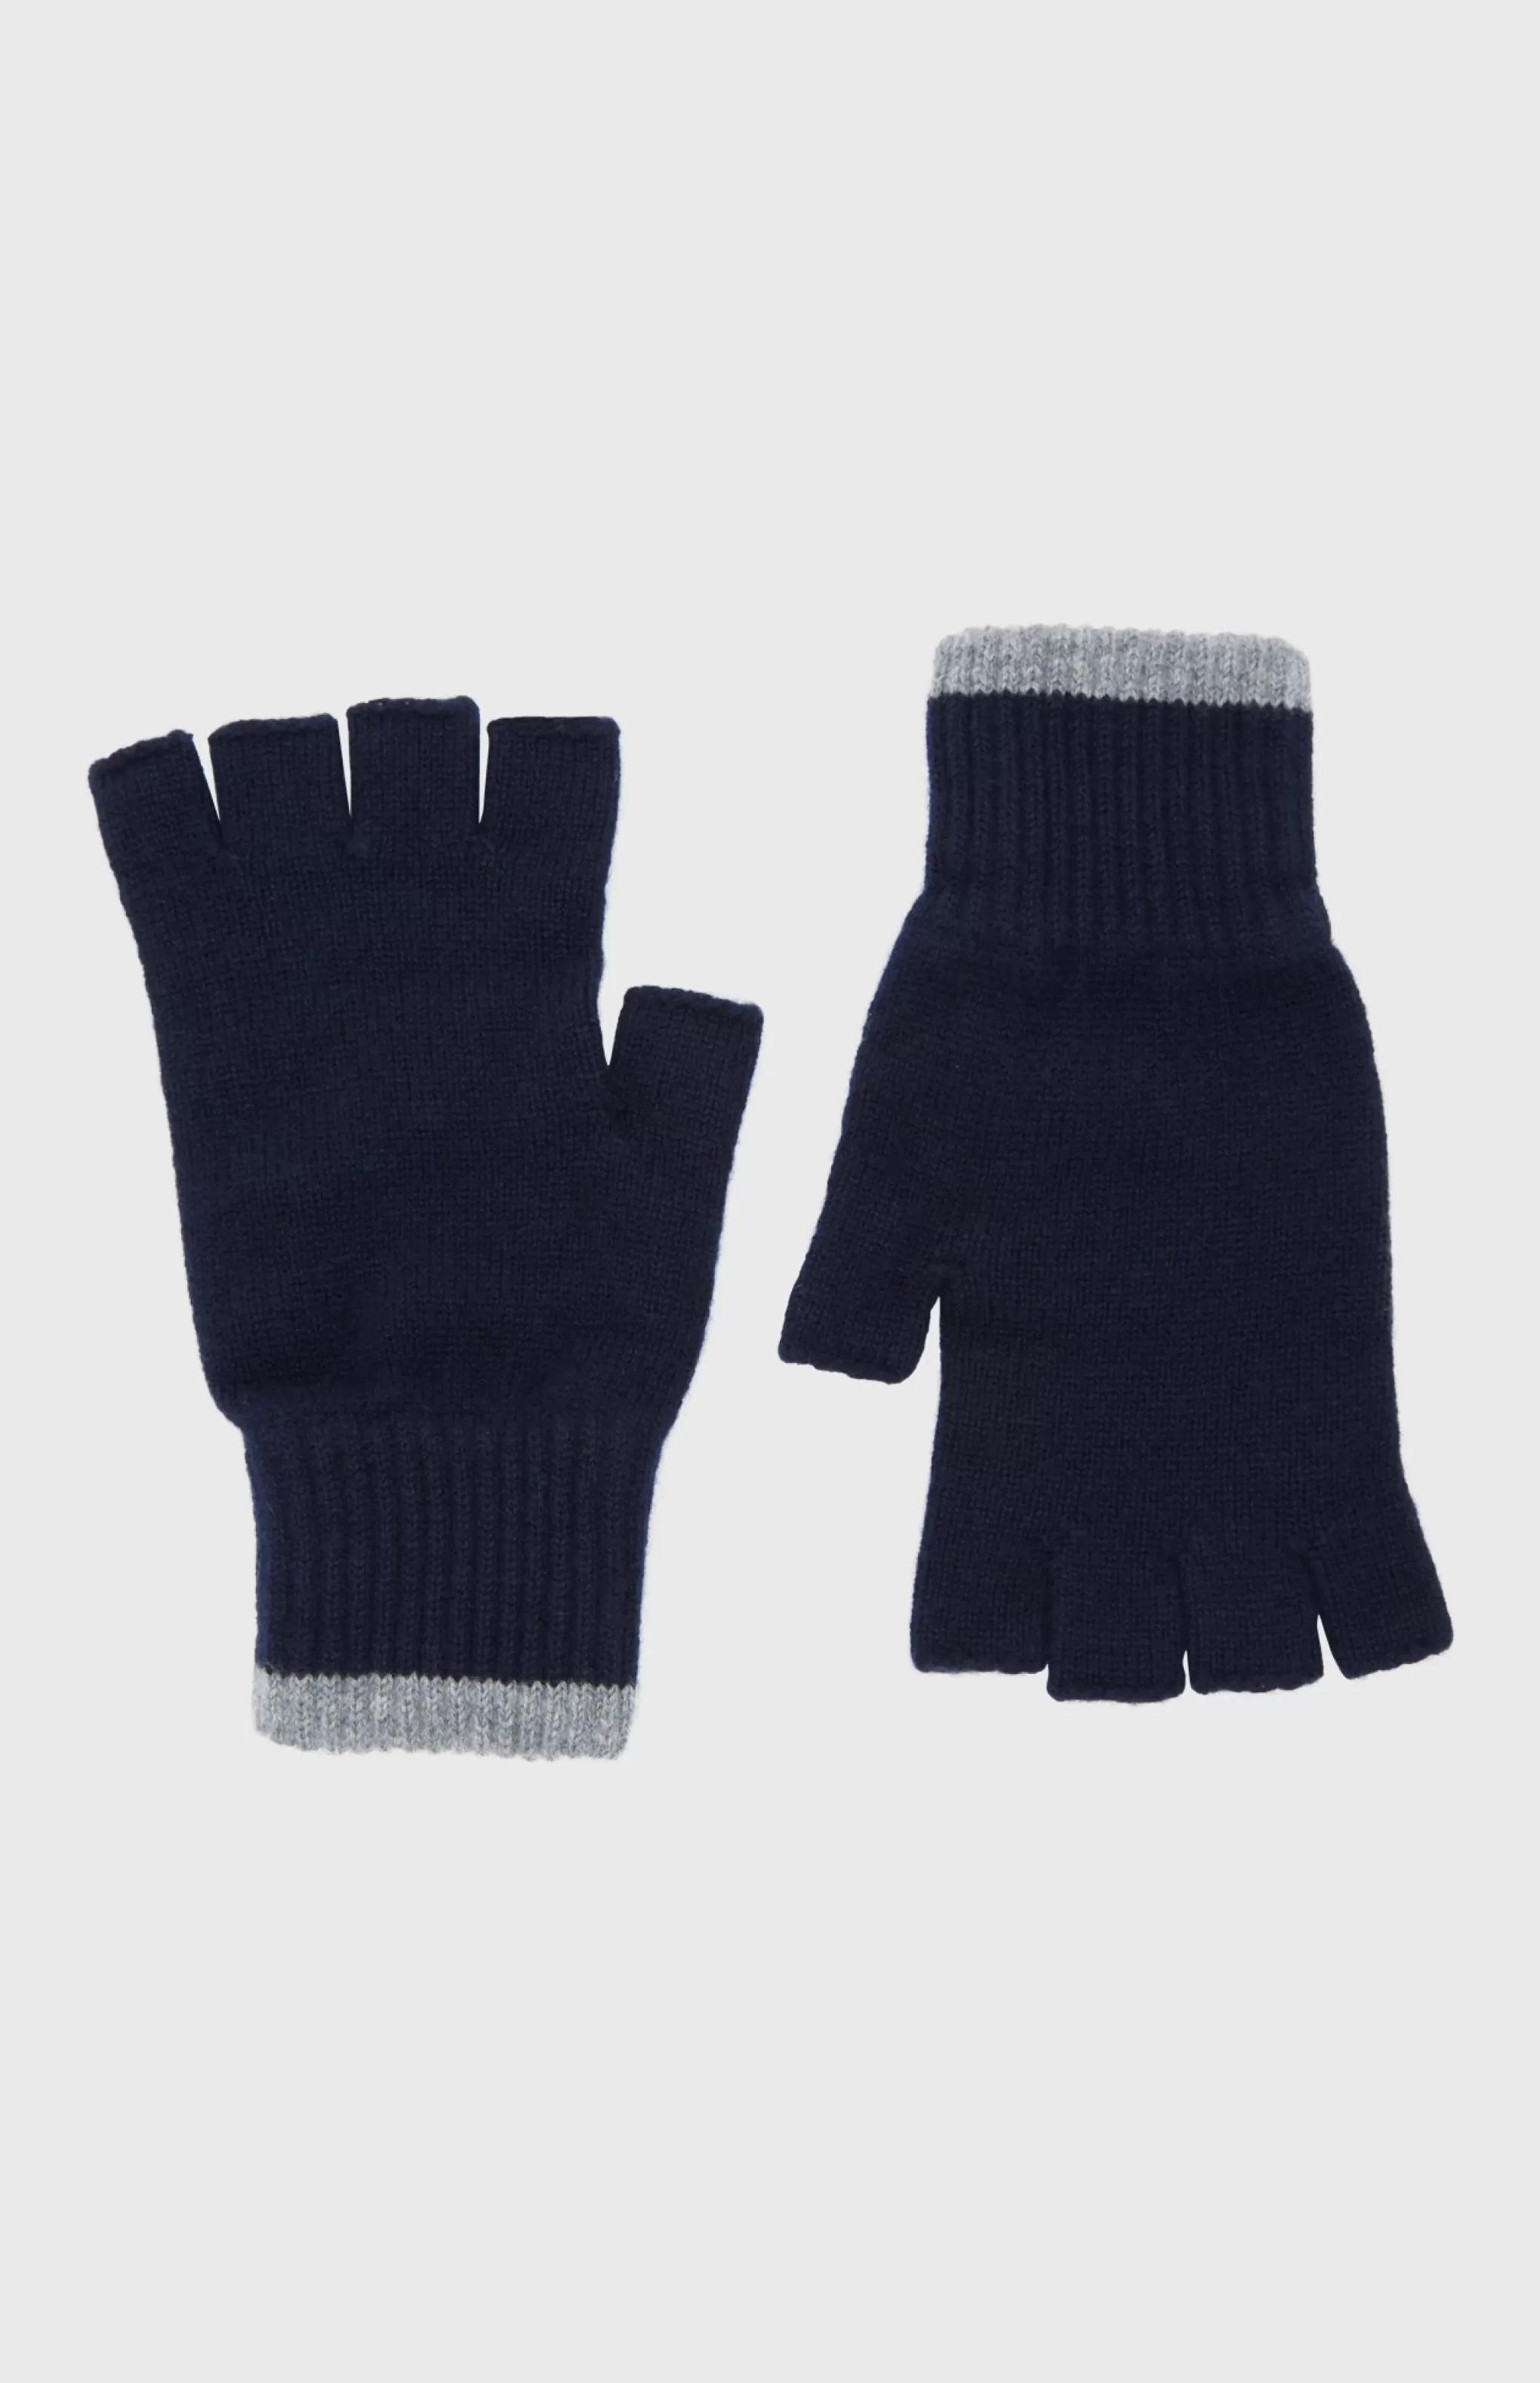 Flash Sale Cashmere Fingerless Gloves Contrast Ribs In Ink And Flannel Grey Men/Women Gloves